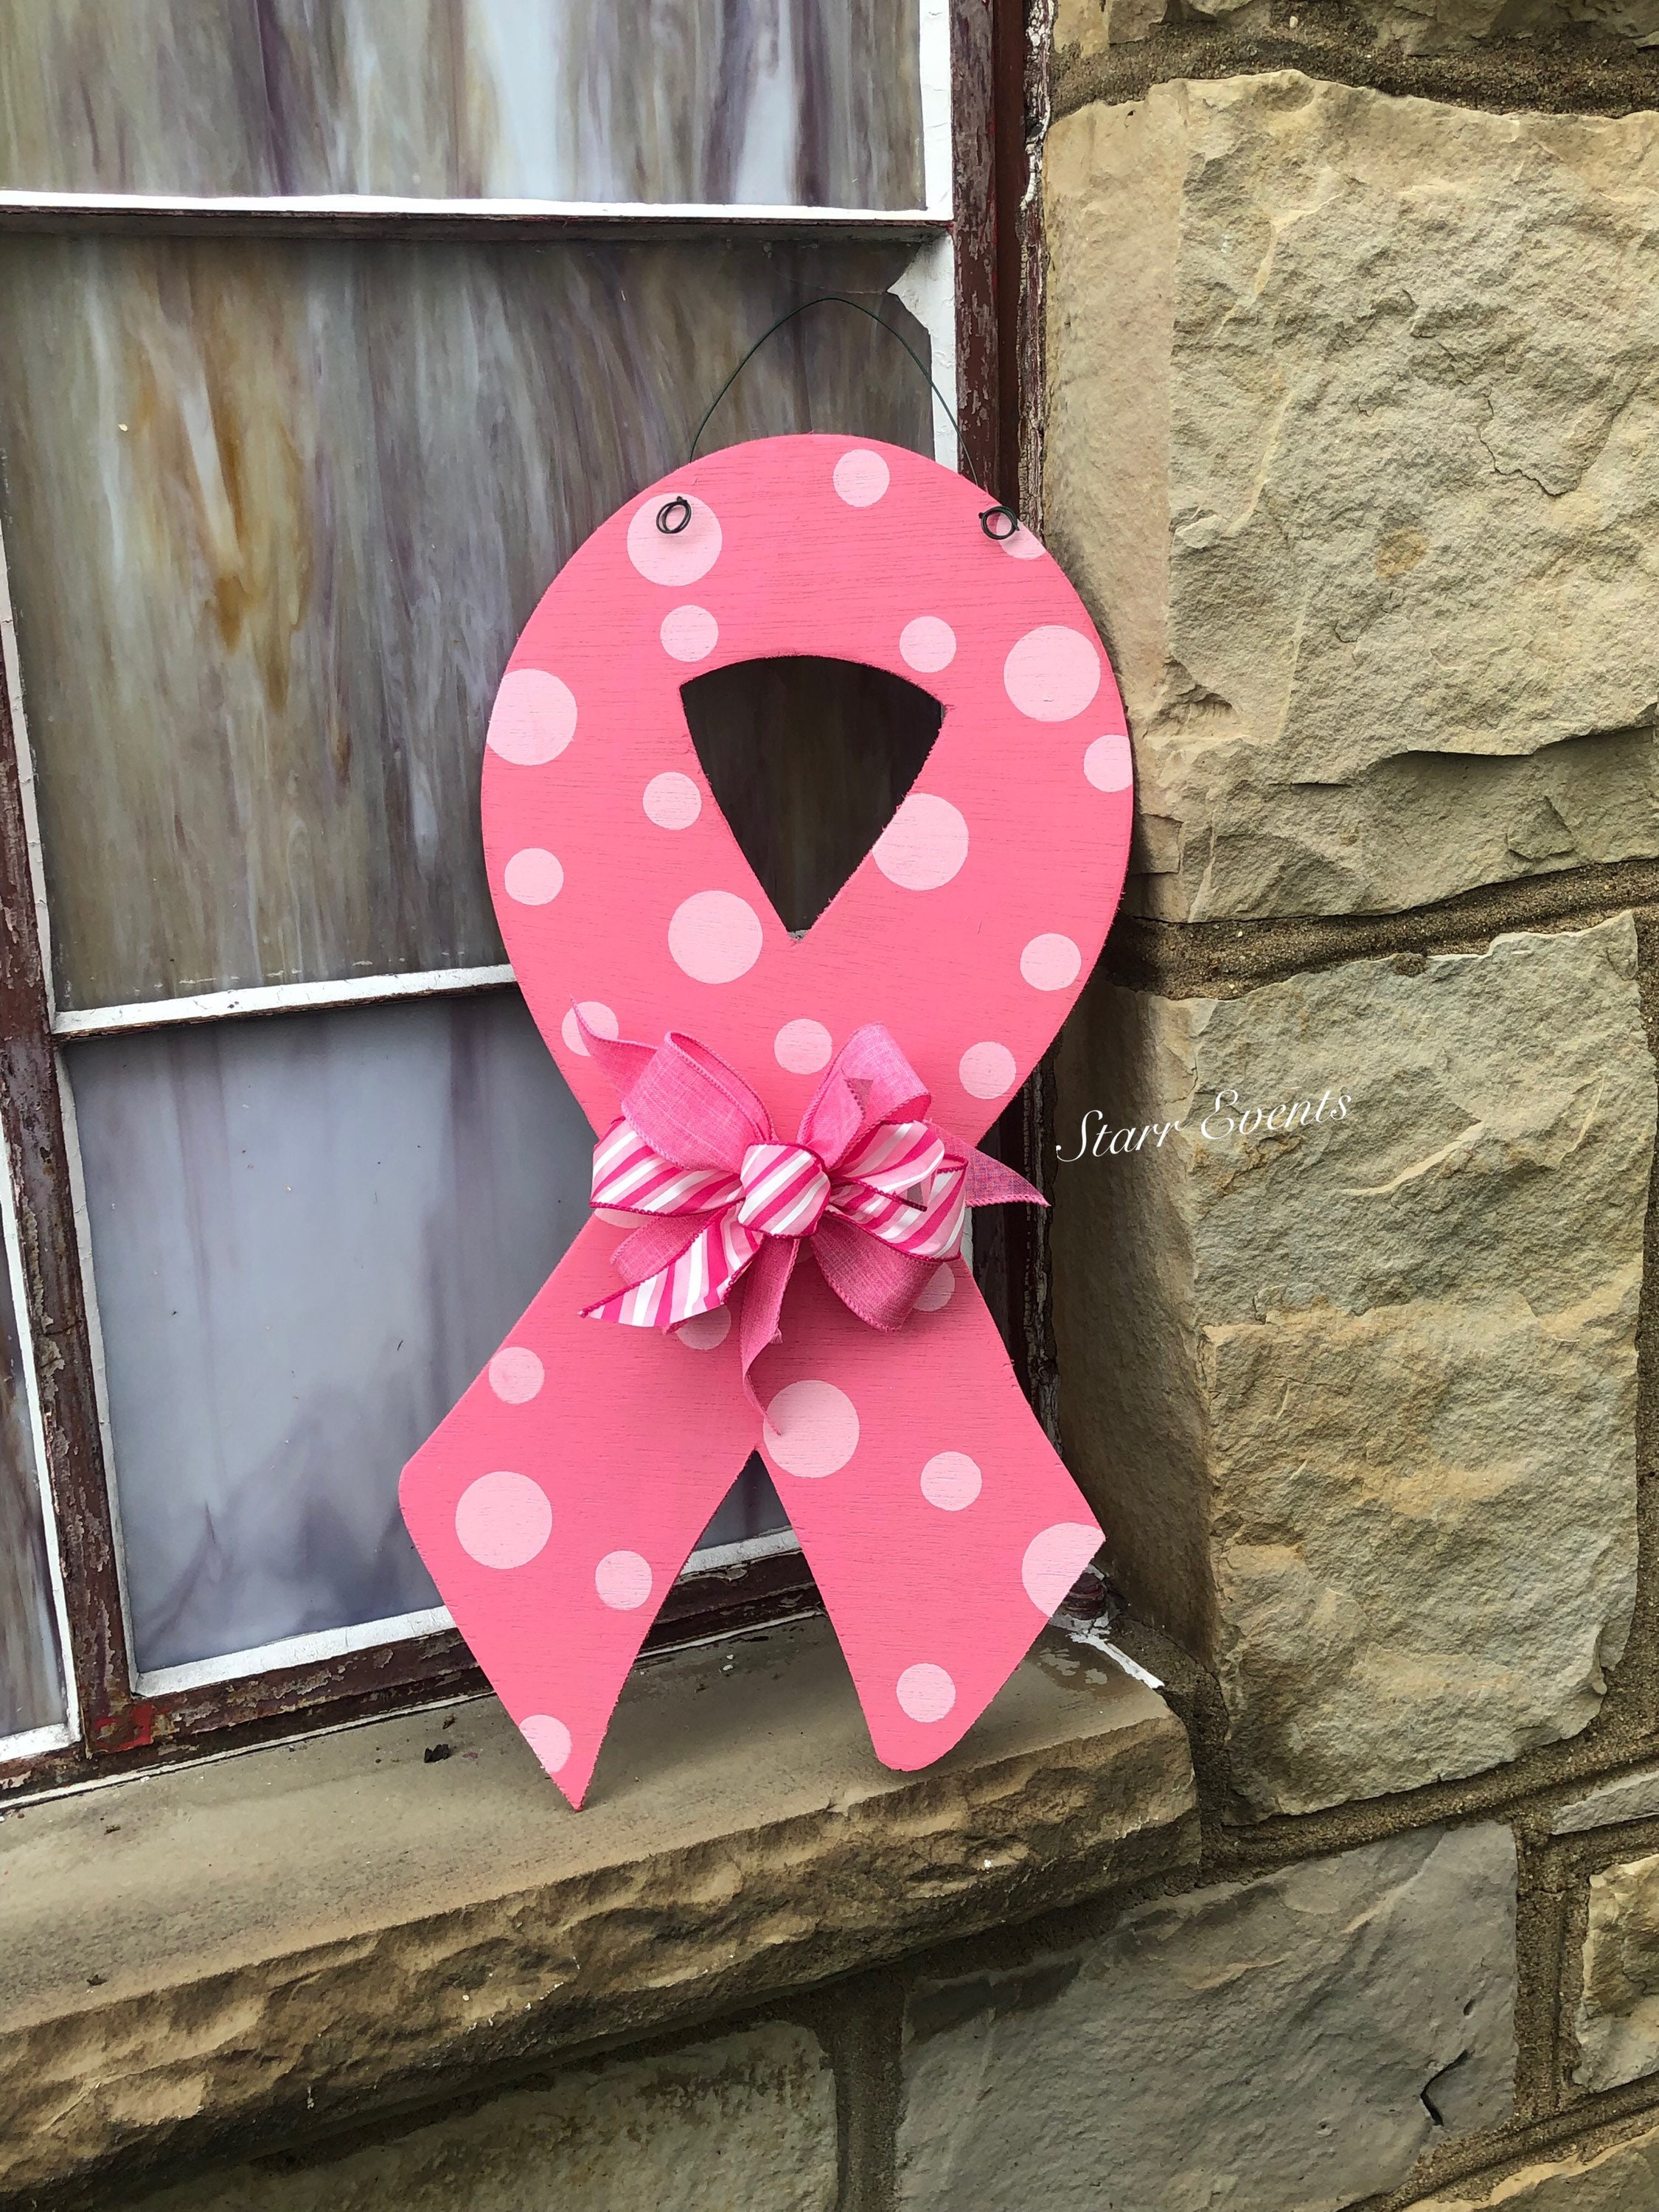 Fundraising For A Cause Large Pink Ribbon - Donation Paper Ribbons - Breast  Cancer Awareness Accessories - Temporary Decals & Decorations - Cutouts to